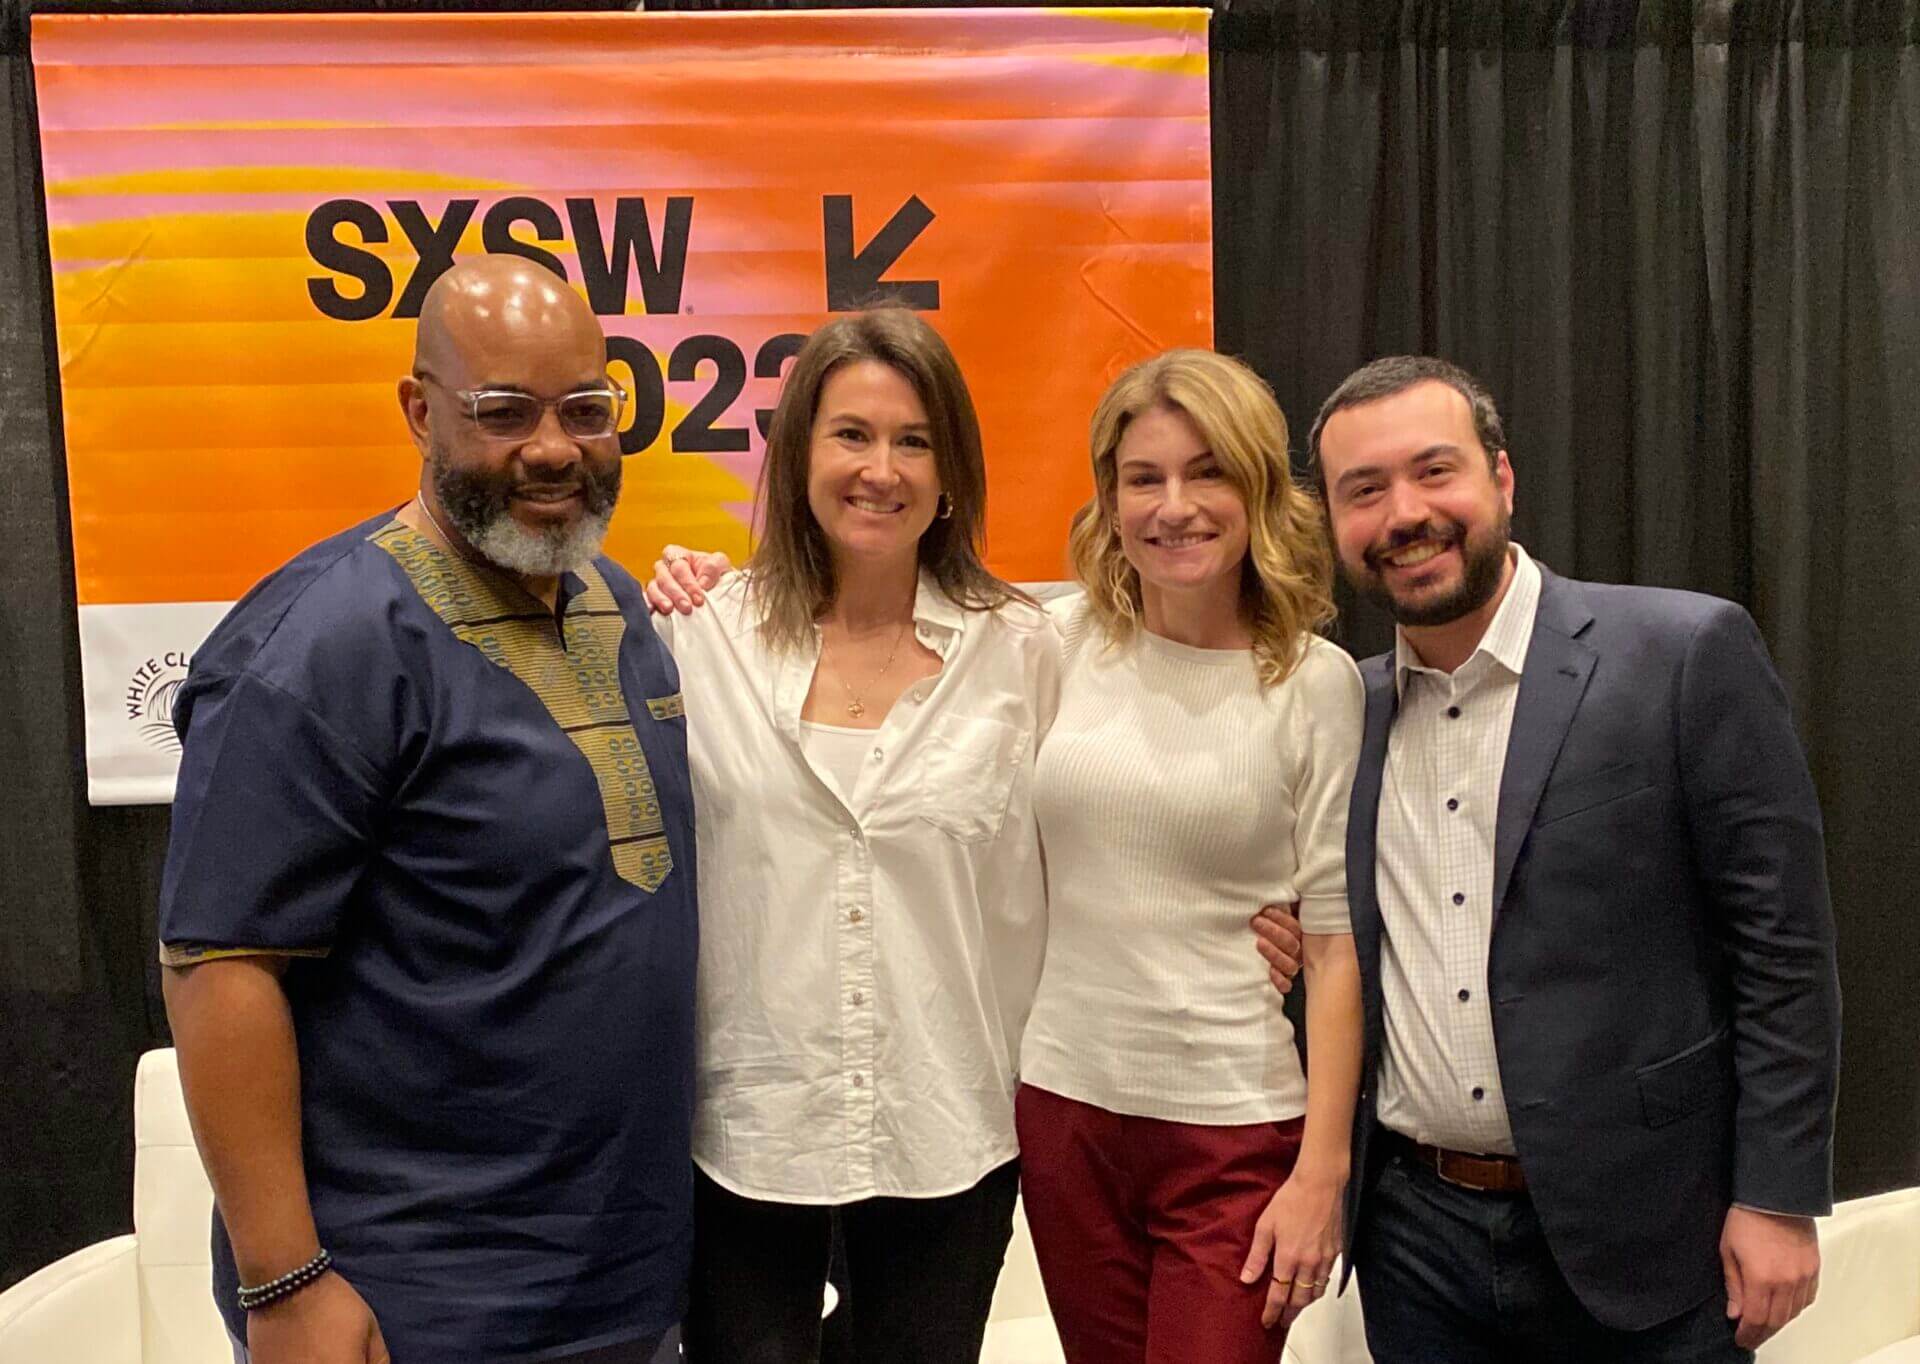 Panelist and Participant: Lessons Learned From SXSW